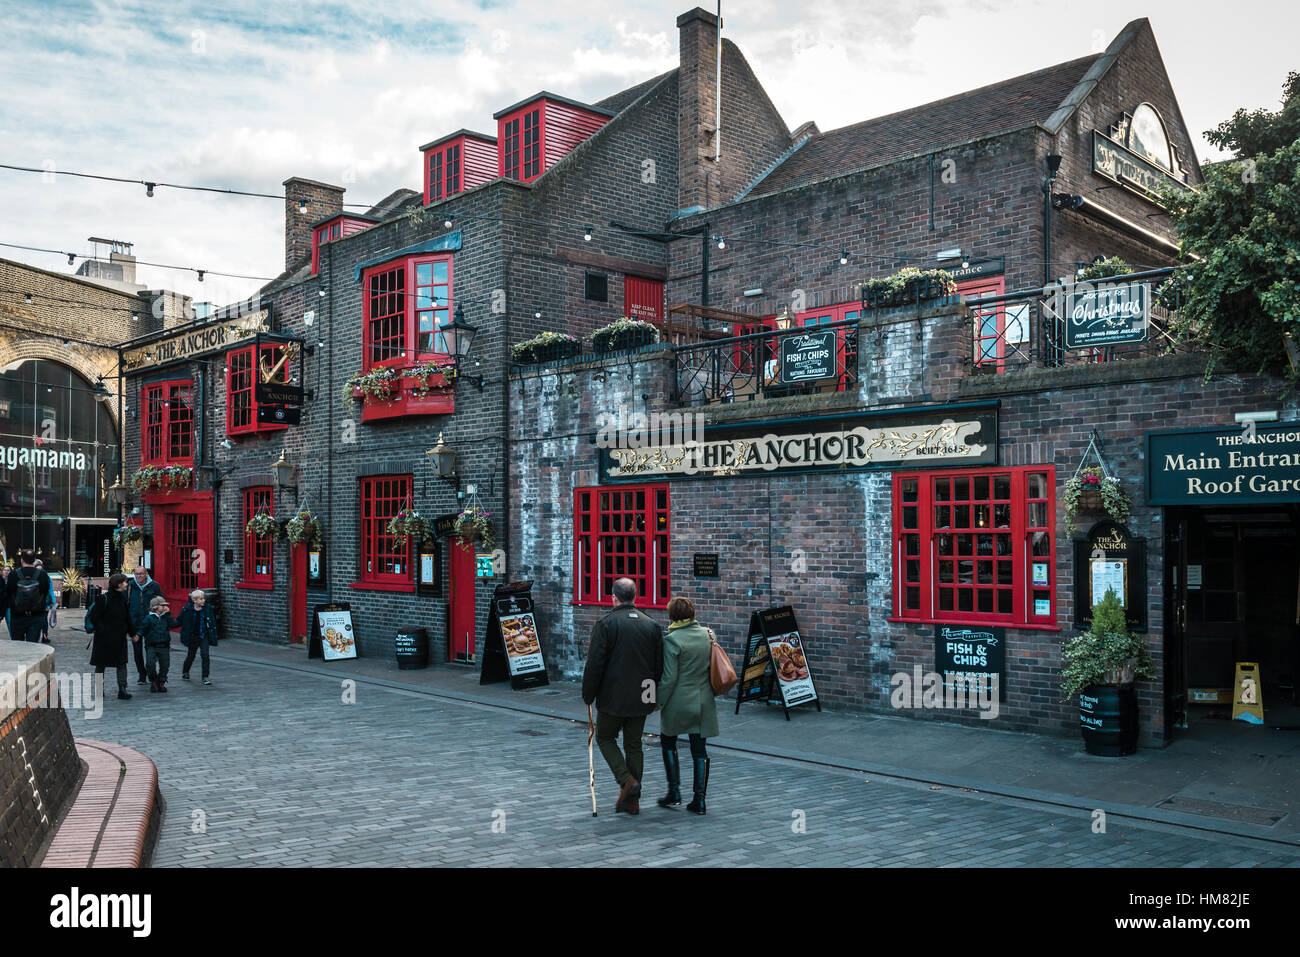 London, United Kingdom - October 18, 2016: People are walking near the Anchor Bankside which is a pub in the London Borough of Southwark. Stock Photo